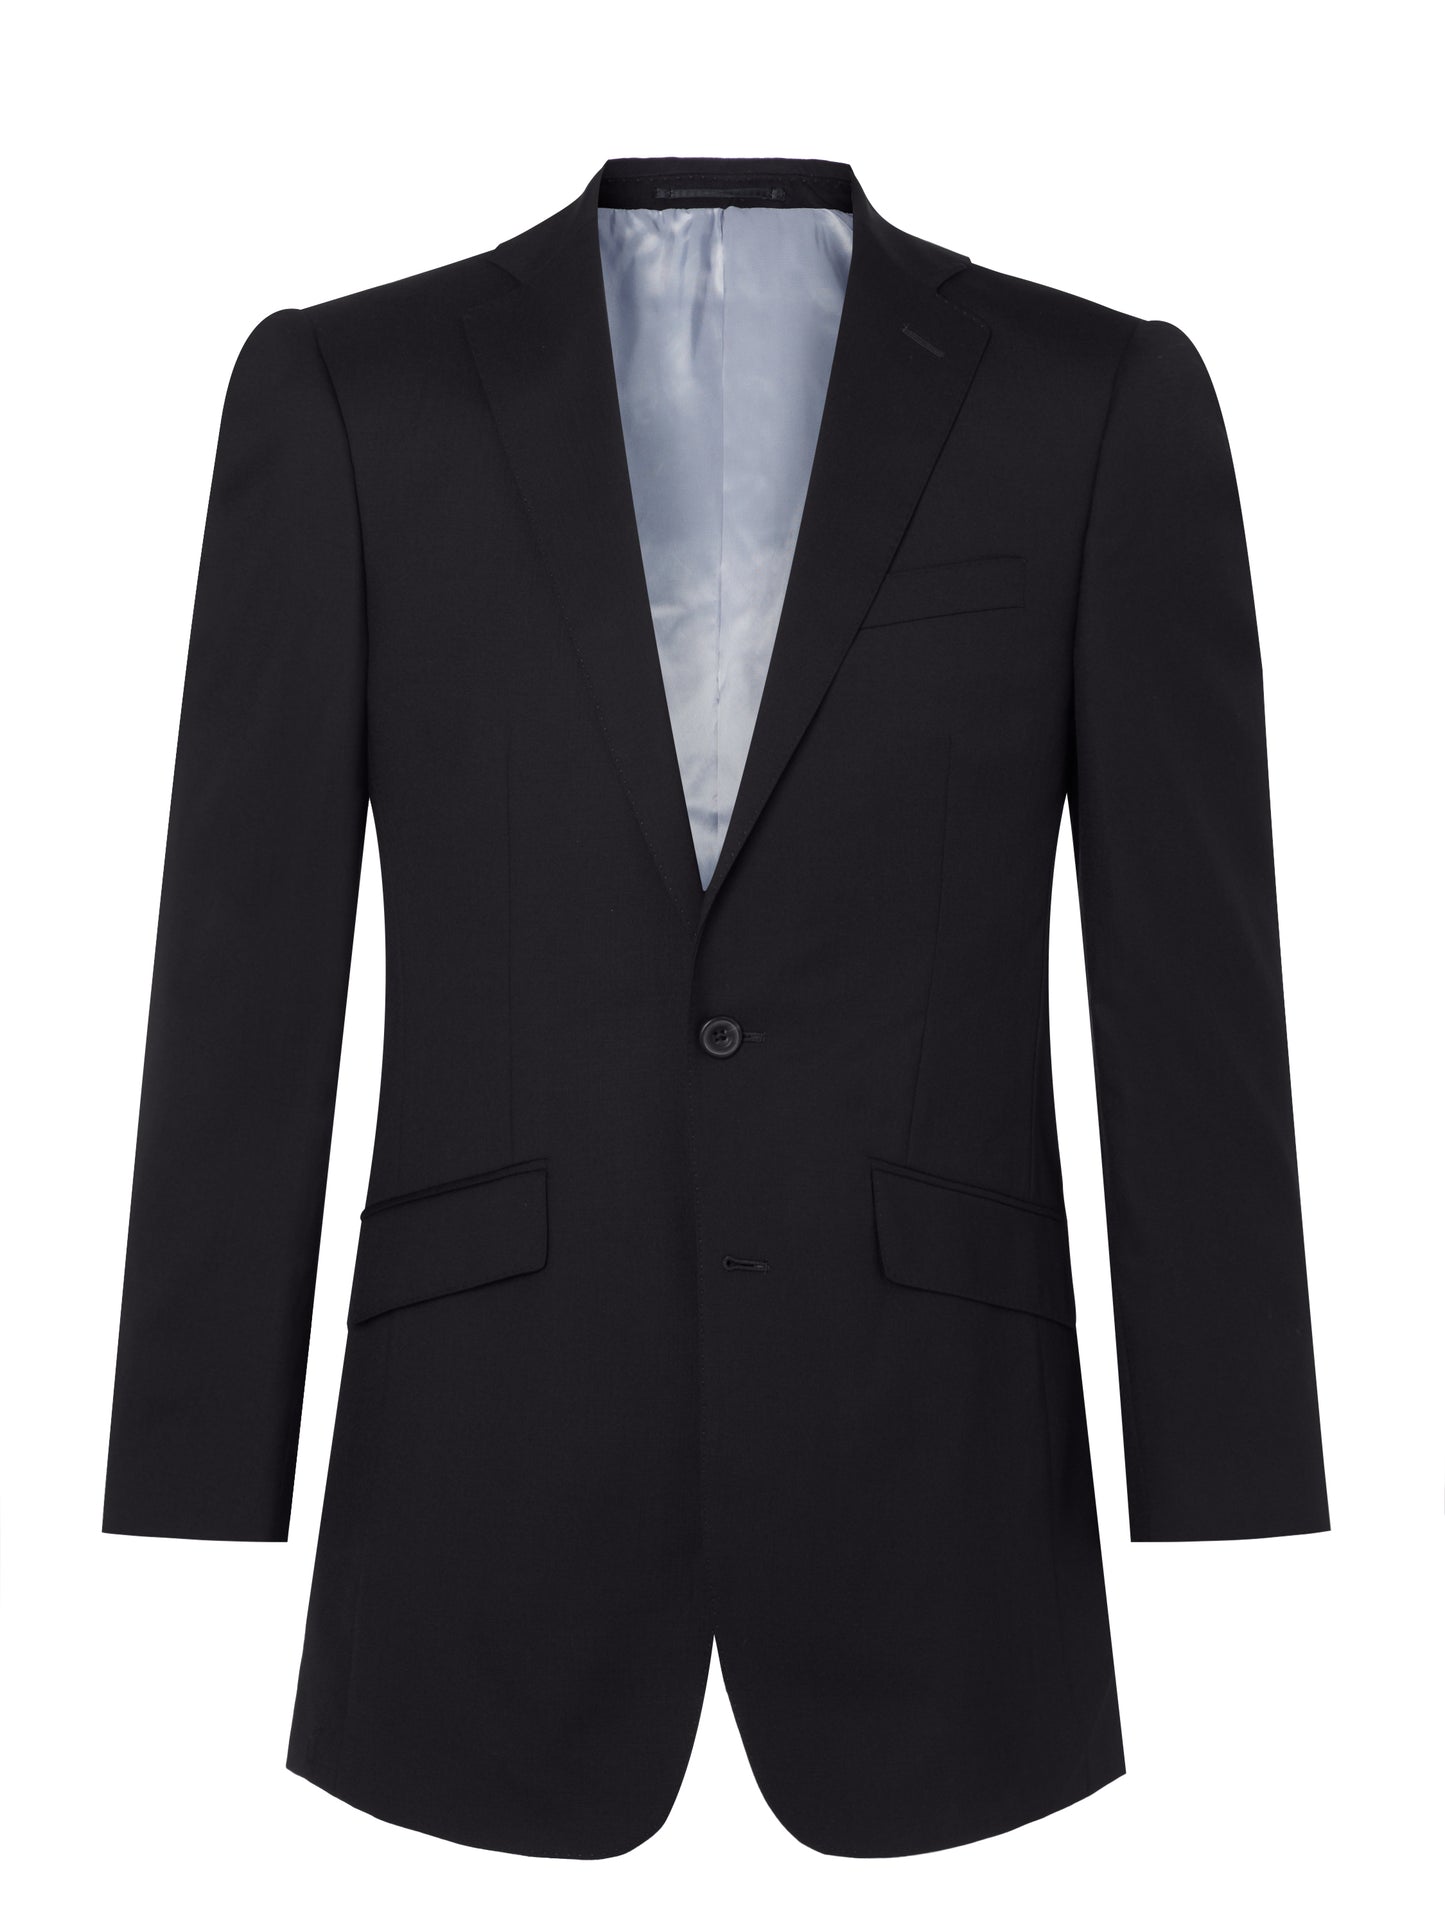 Limited Edition Sloane Suit - Black Twill